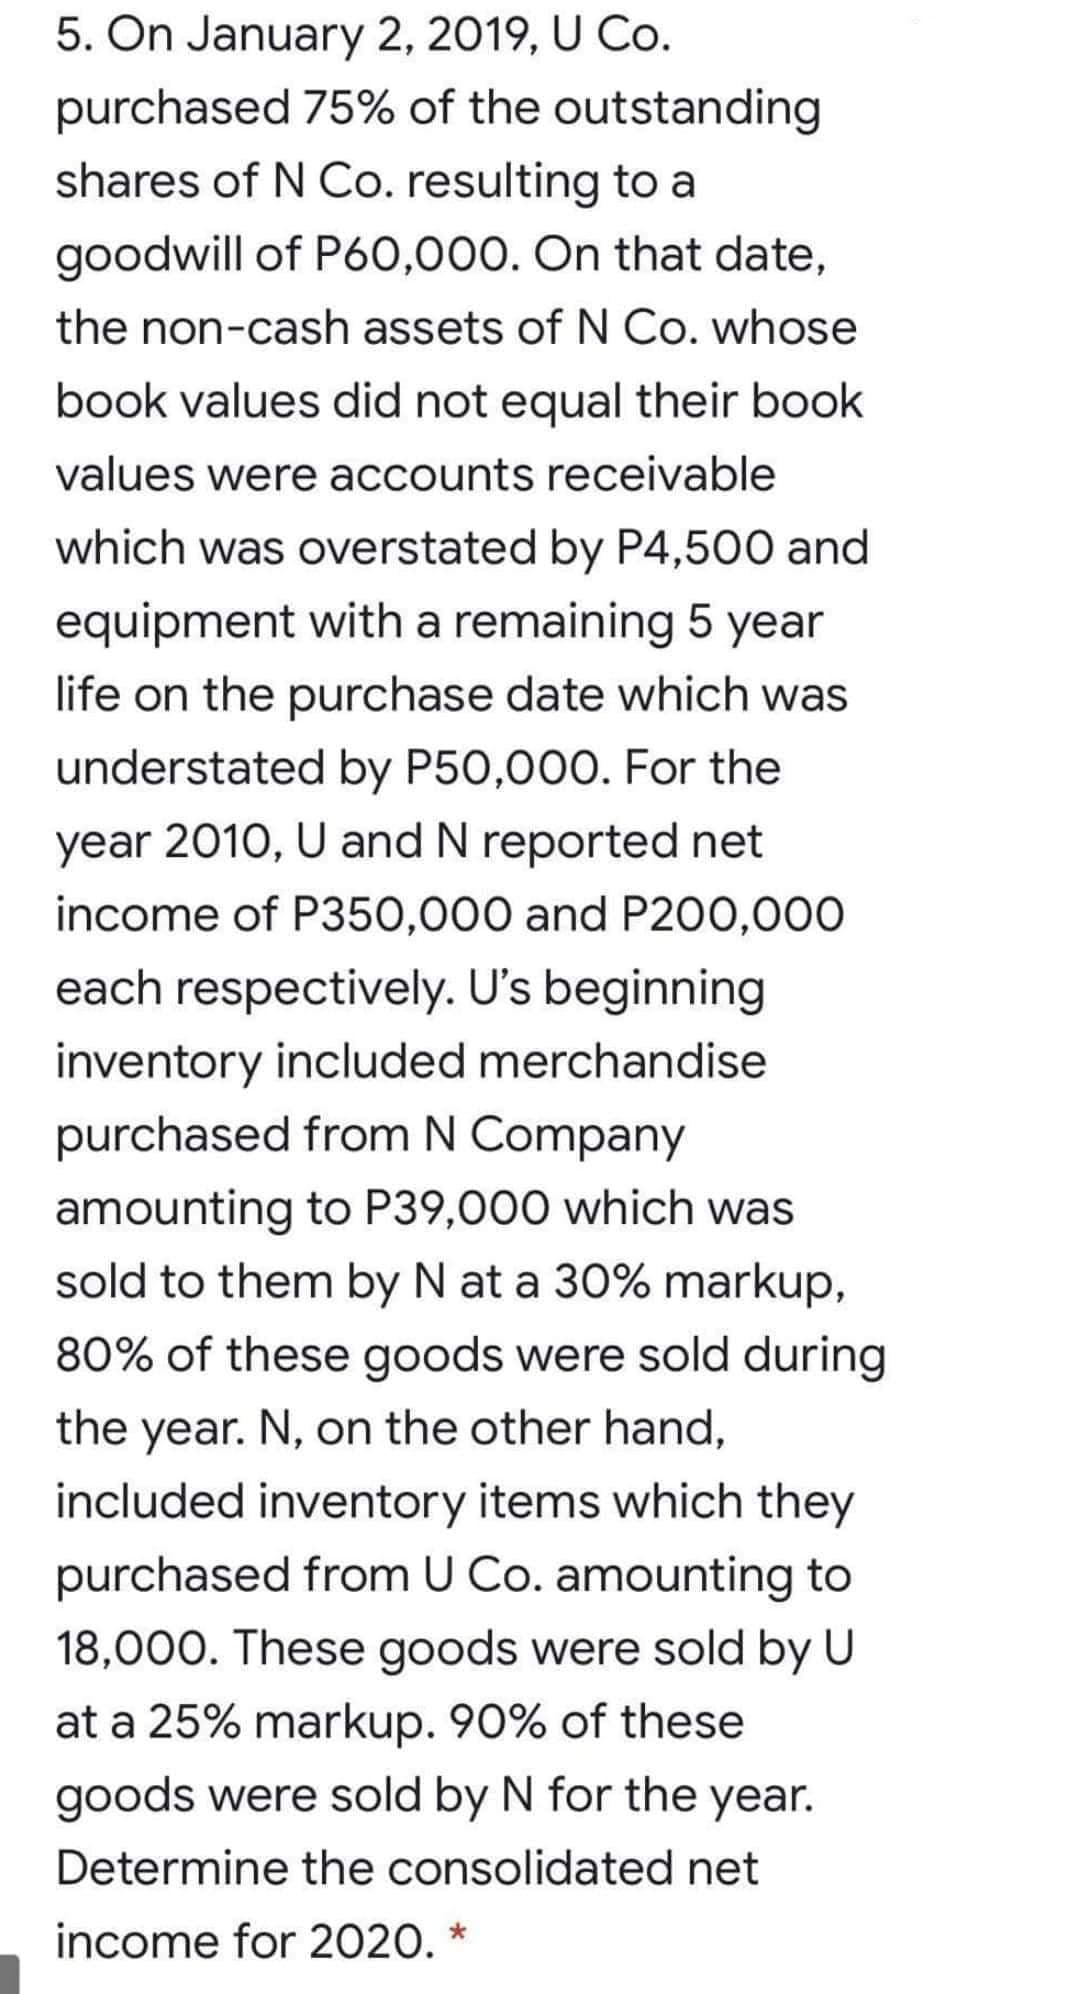 5. On January 2, 2019, U Co.
purchased 75% of the outstanding
shares of N Co. resulting to a
goodwill of P60,000. On that date,
the non-cash assets of N Co. whose
book values did not equal their book
values were accounts receivable
which was overstated by P4,500 and
equipment with a remaining 5 year
life on the purchase date which was
understated by P50,000. For the
year 2010, U and N reported net
income of P350,000 and P200,000
each respectively. U's beginning
inventory included merchandise
purchased from N Company
amounting to P39,000 which was
sold to them by N at a 30% markup,
80% of these goods were sold during
the year. N, on the other hand,
included inventory items which they
purchased from U Co. amounting to
18,000. These goods were sold by U
at a 25% markup. 90% of these
goods were sold by N for the year.
Determine the consolidated net
income for 2020. *
